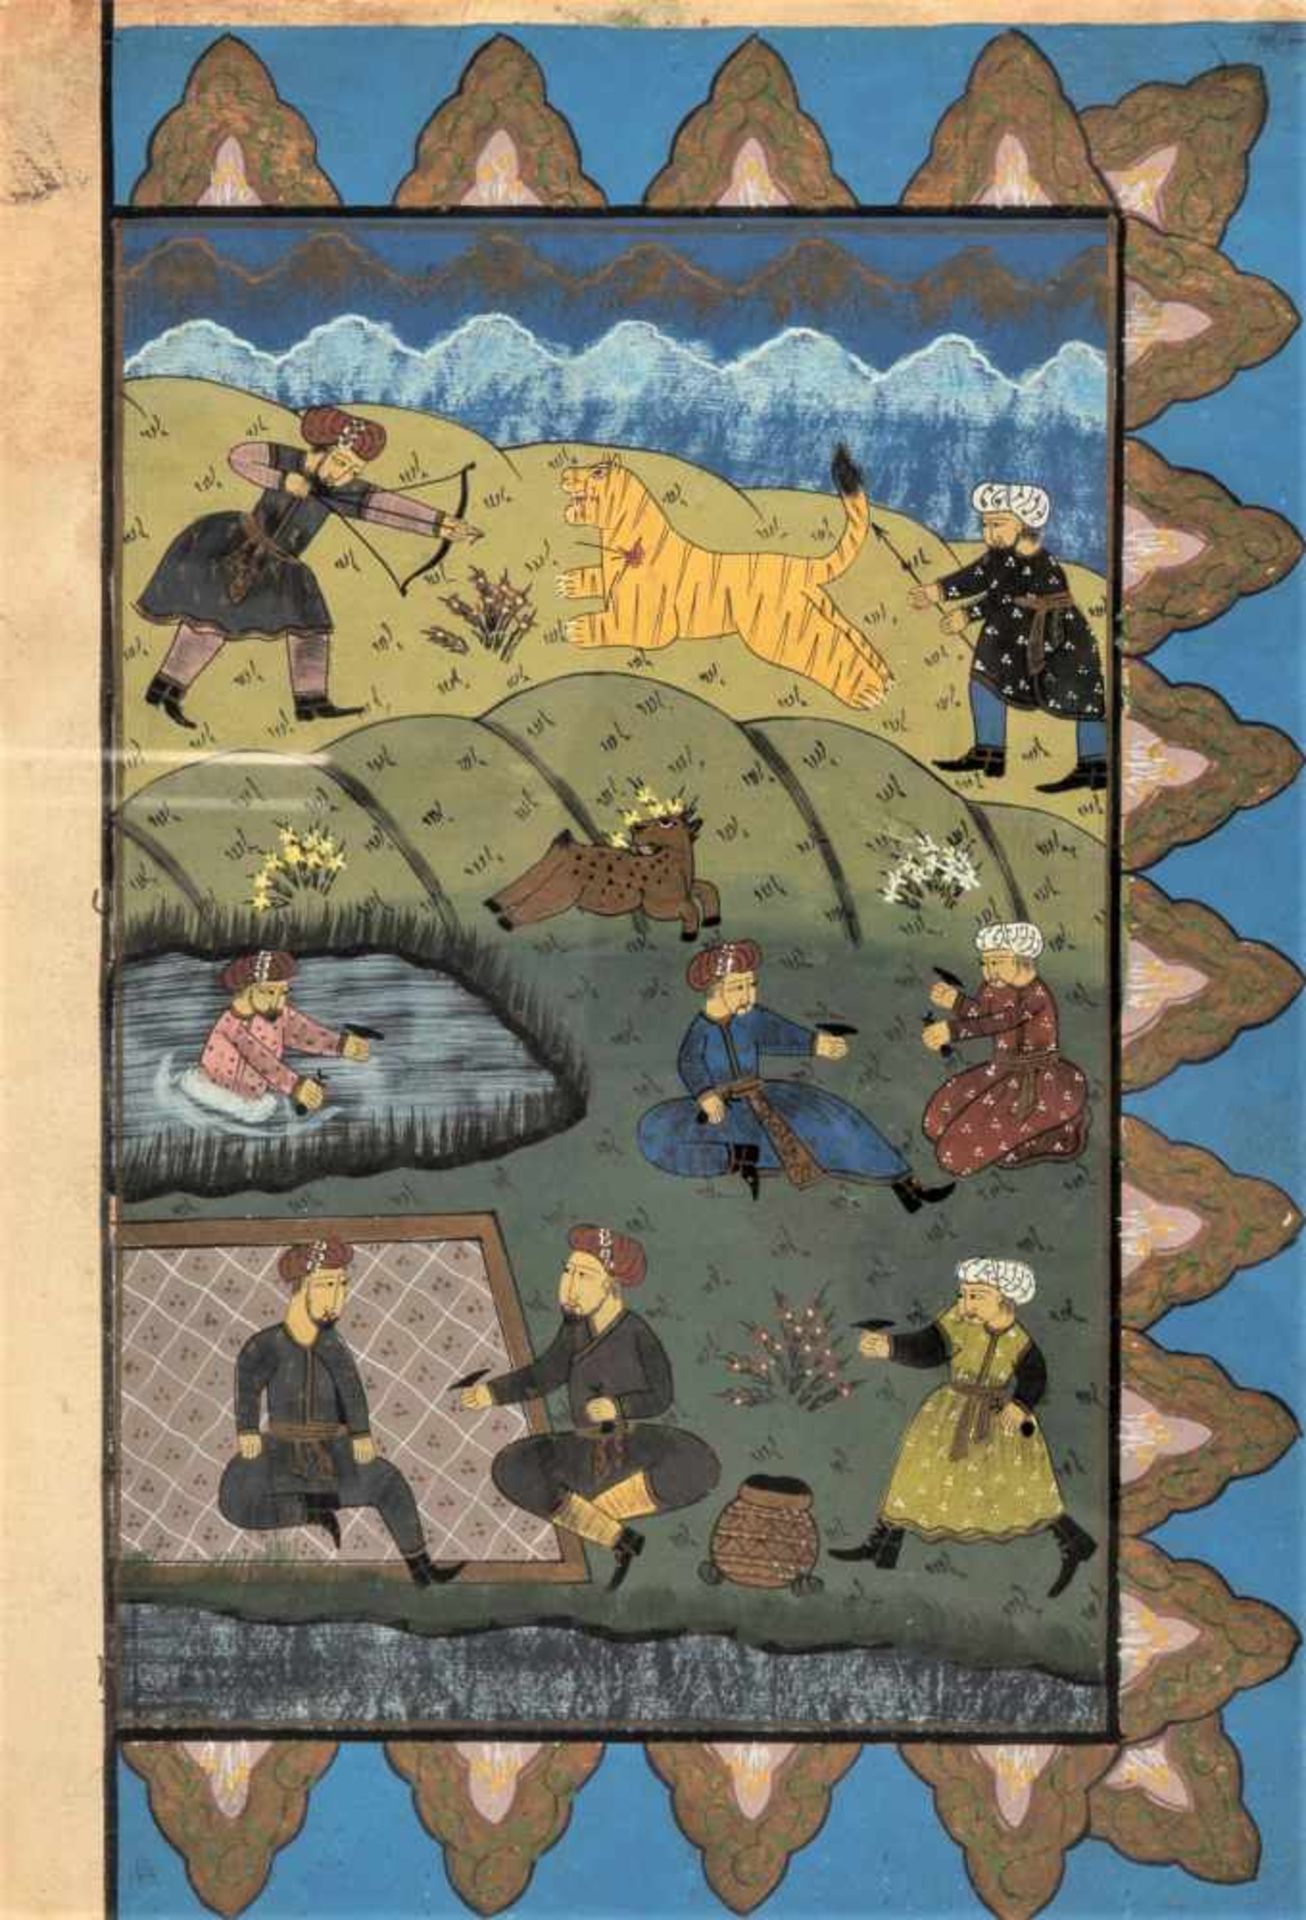 AN INDO-PERSIAN MINIATURE PAINTING - 19th CENTURYMiniature painting with colors and gold on